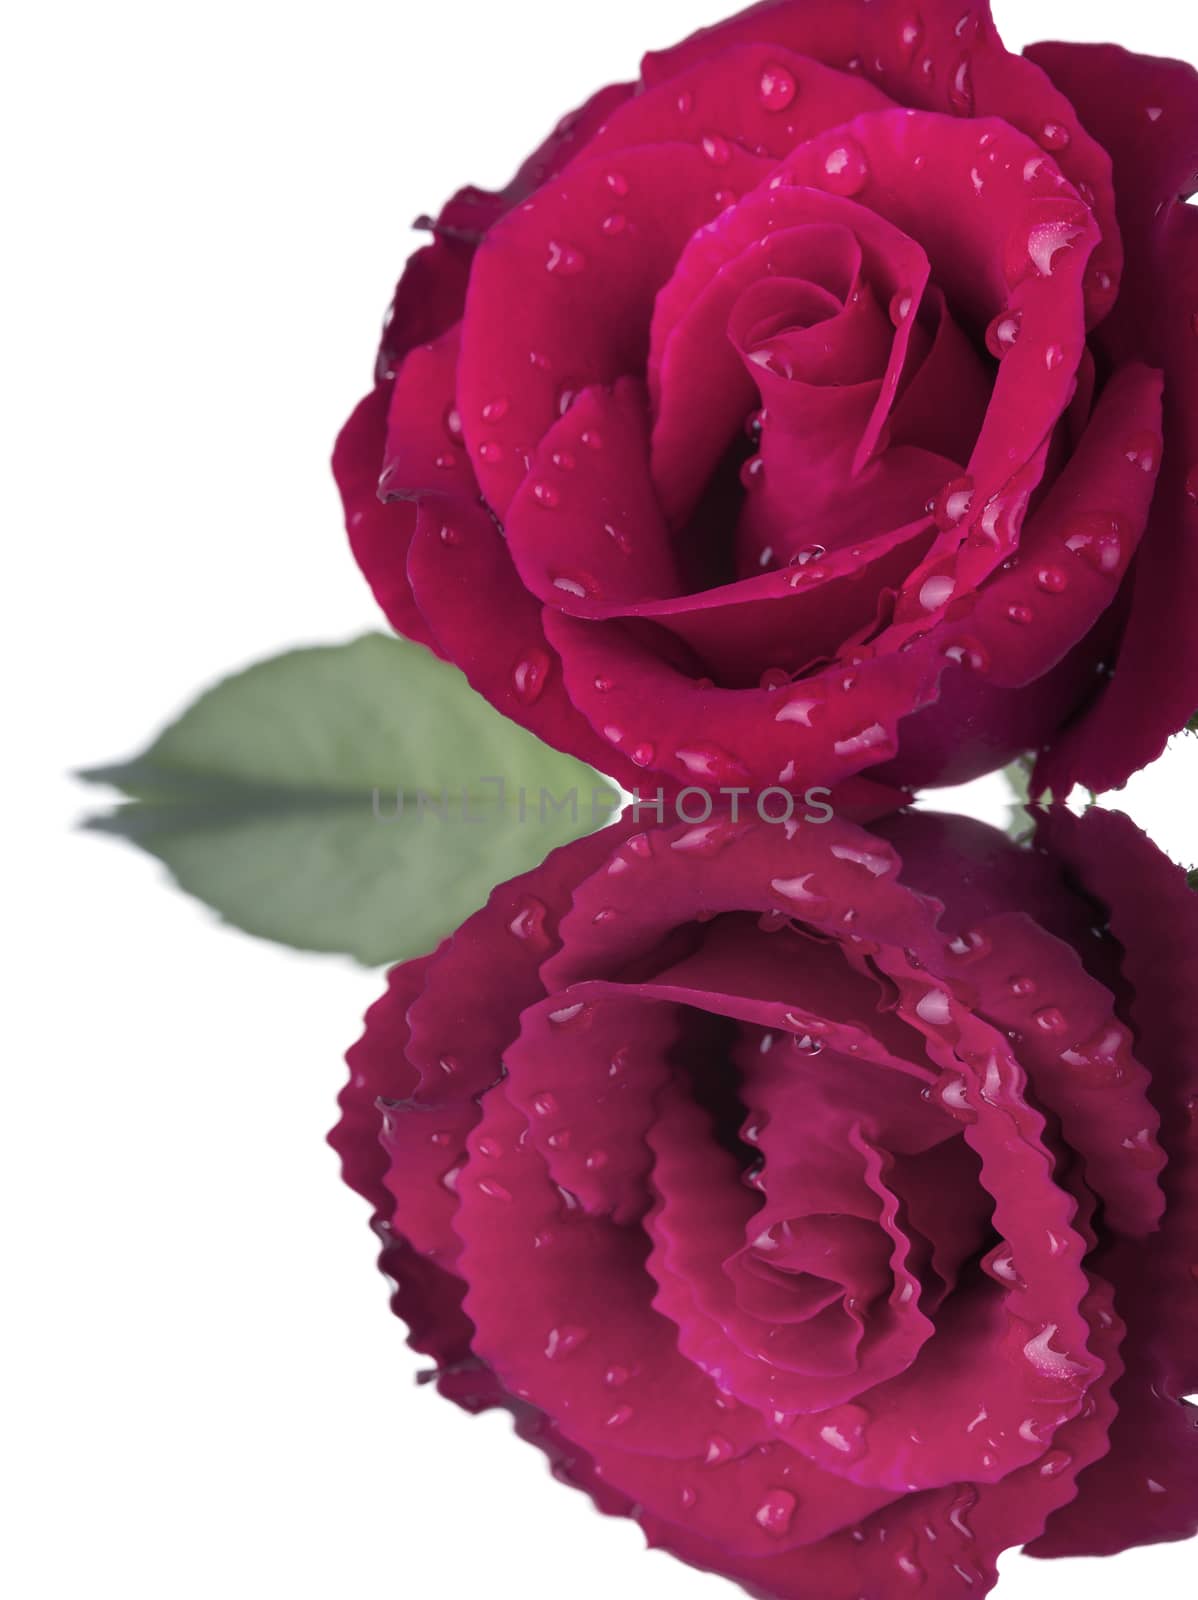 Beautiful red rose isolated on white background.